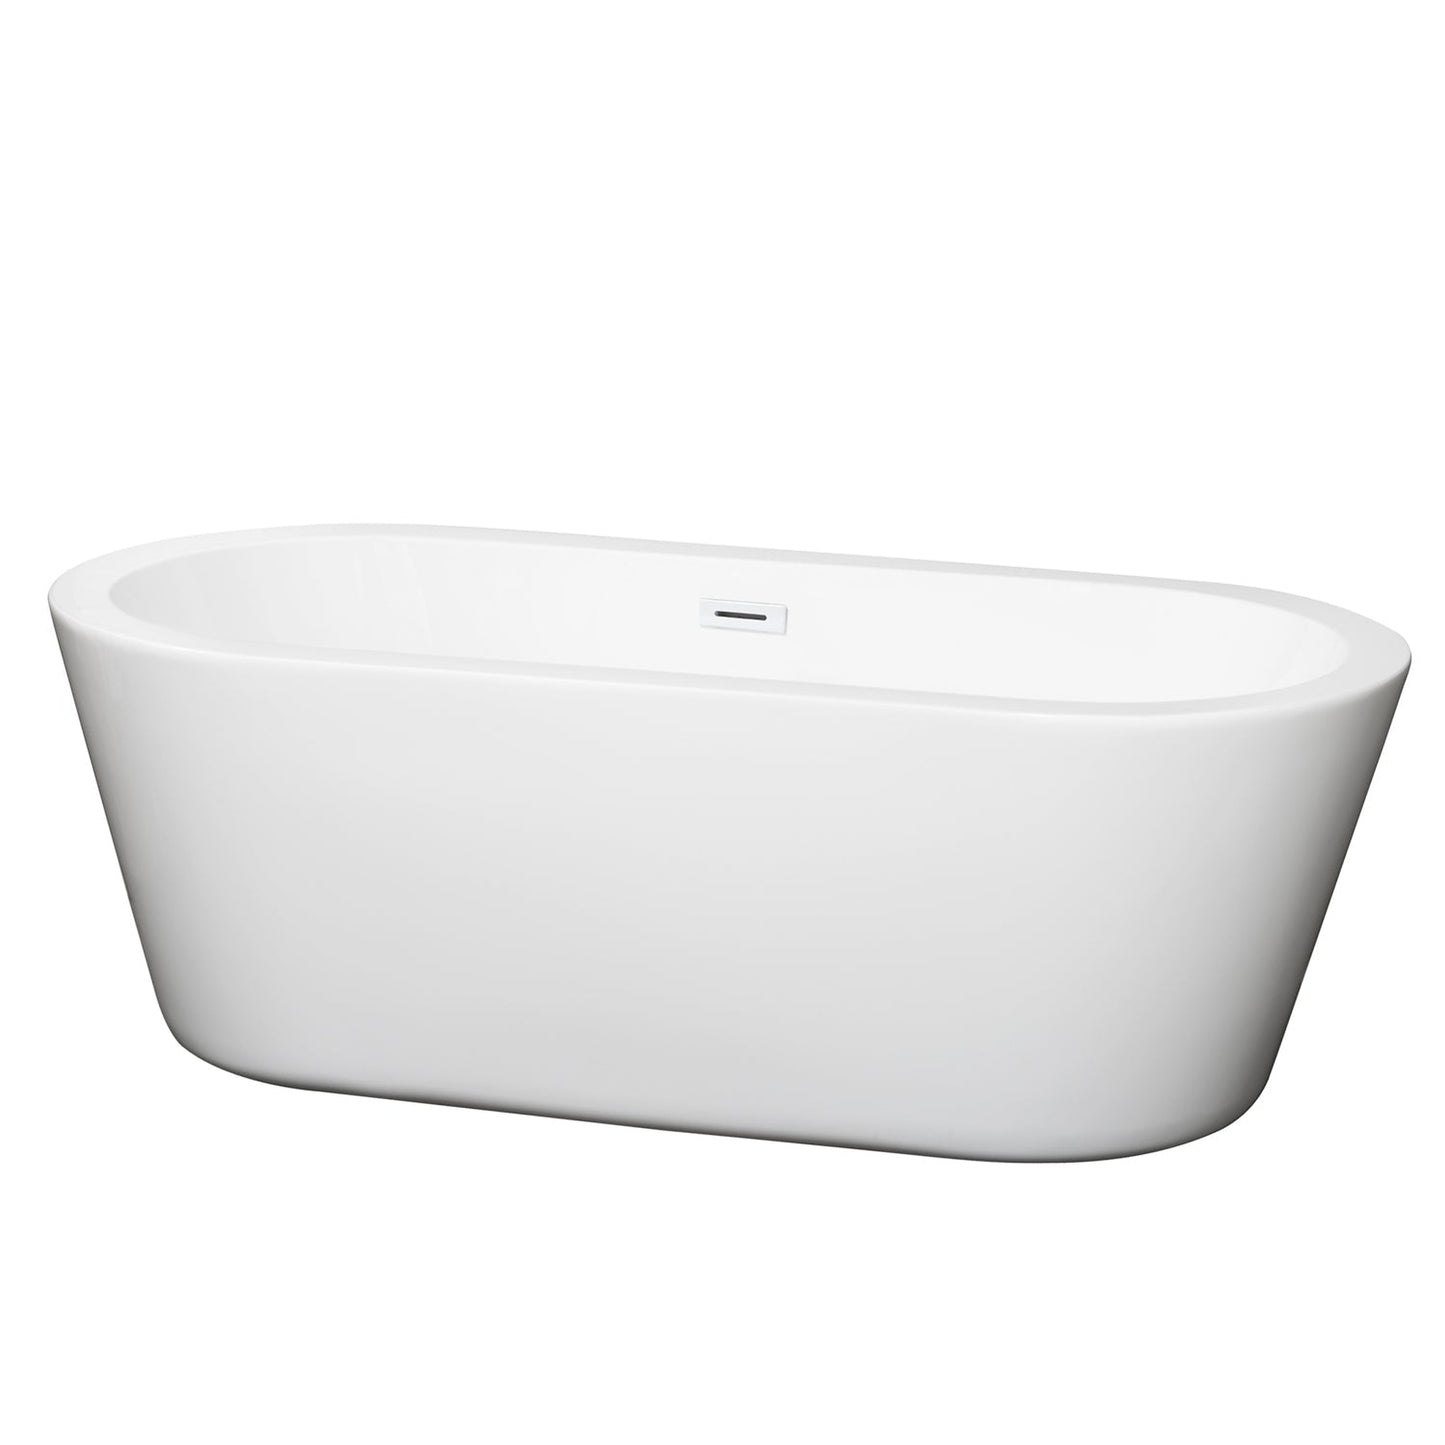 Wyndham Collection Mermaid 67" Freestanding Bathtub in White With Shiny White Drain and Overflow Trim